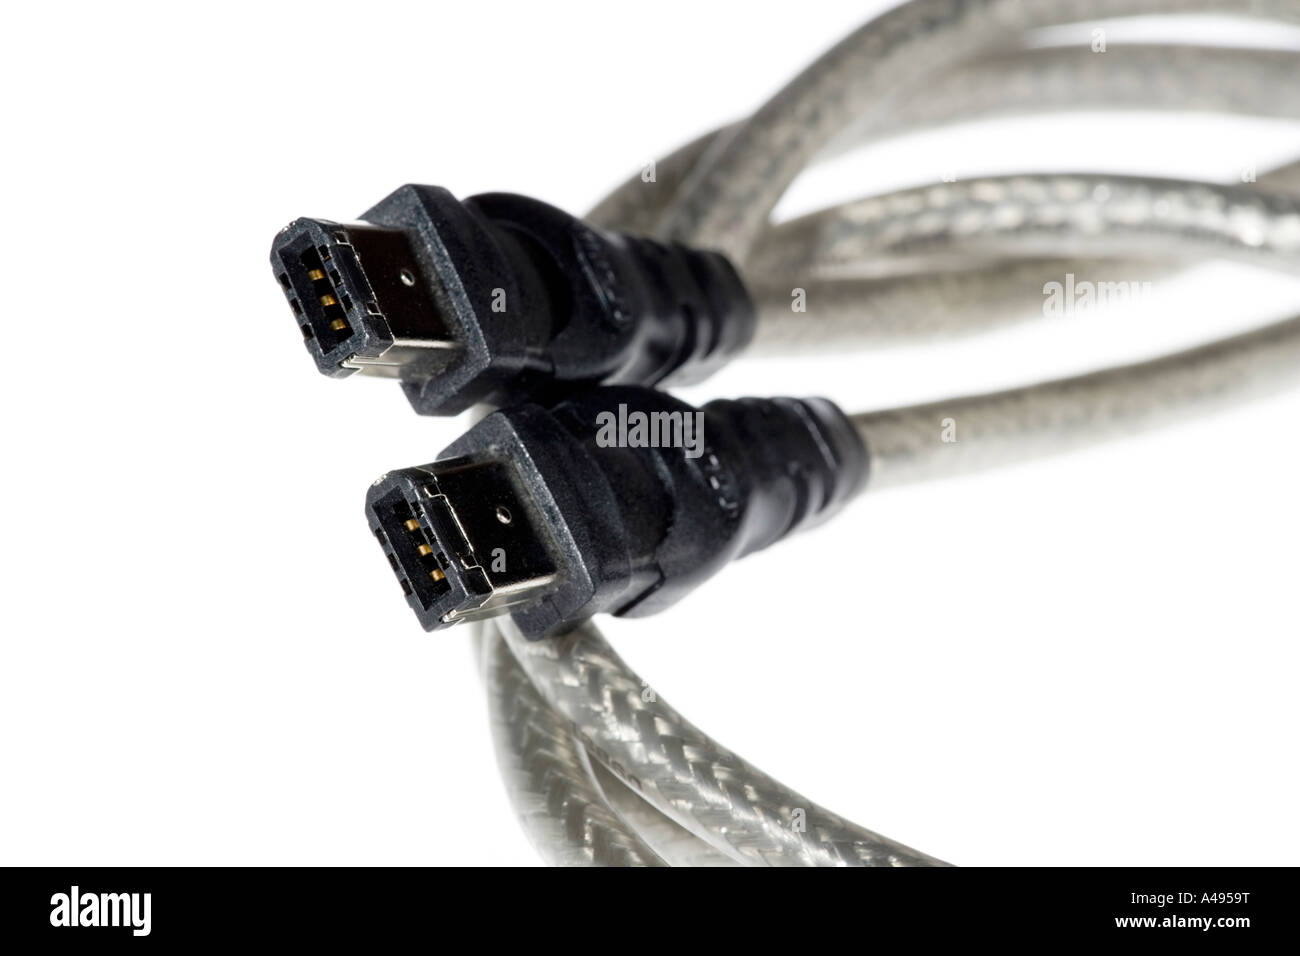 Firewire 800 cable Stock Photo